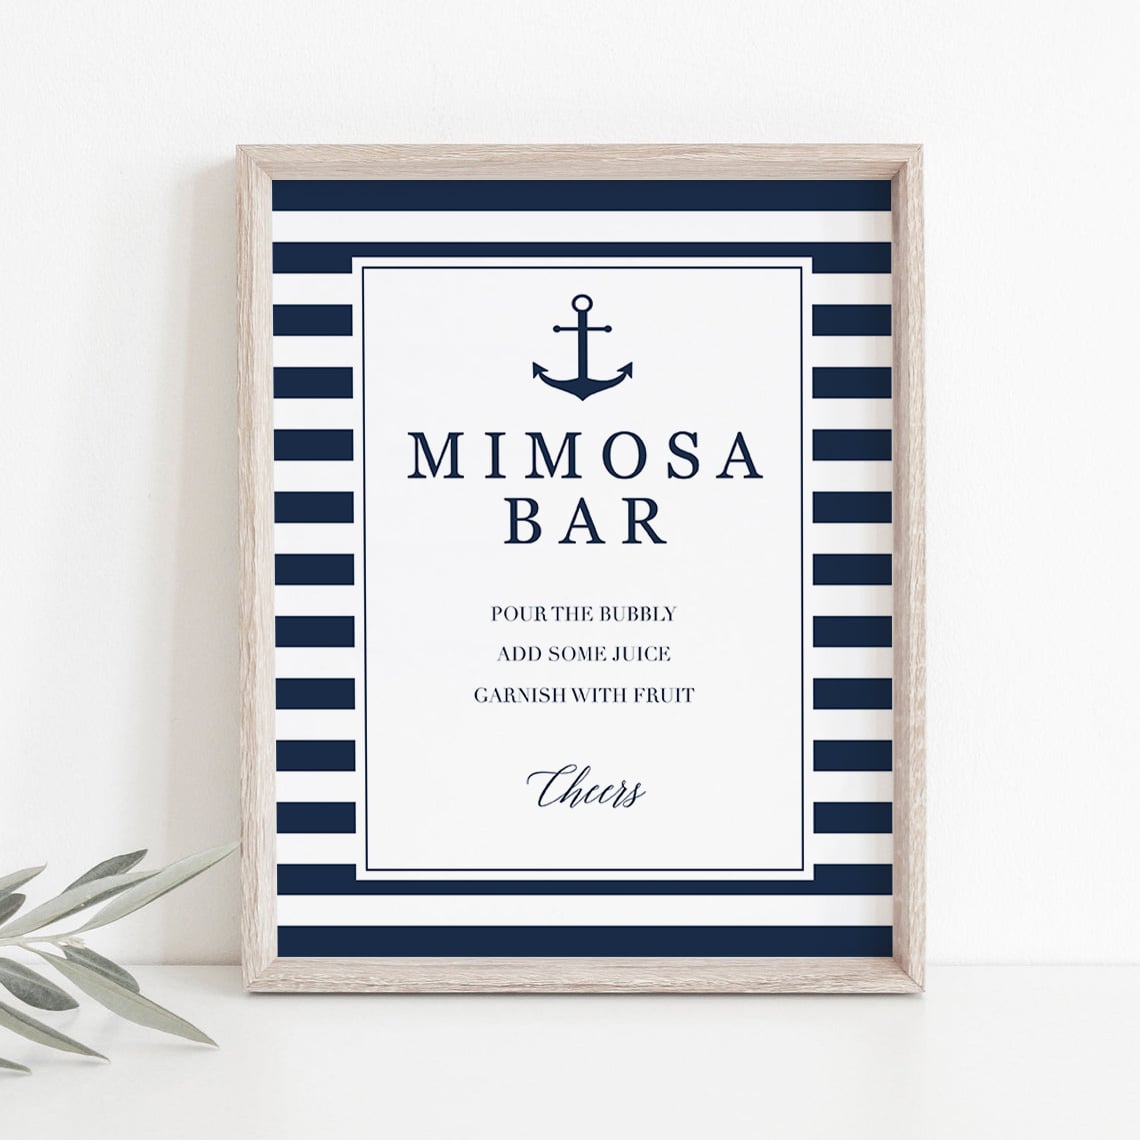 Instant download nautical event decorations by LittleSizzle